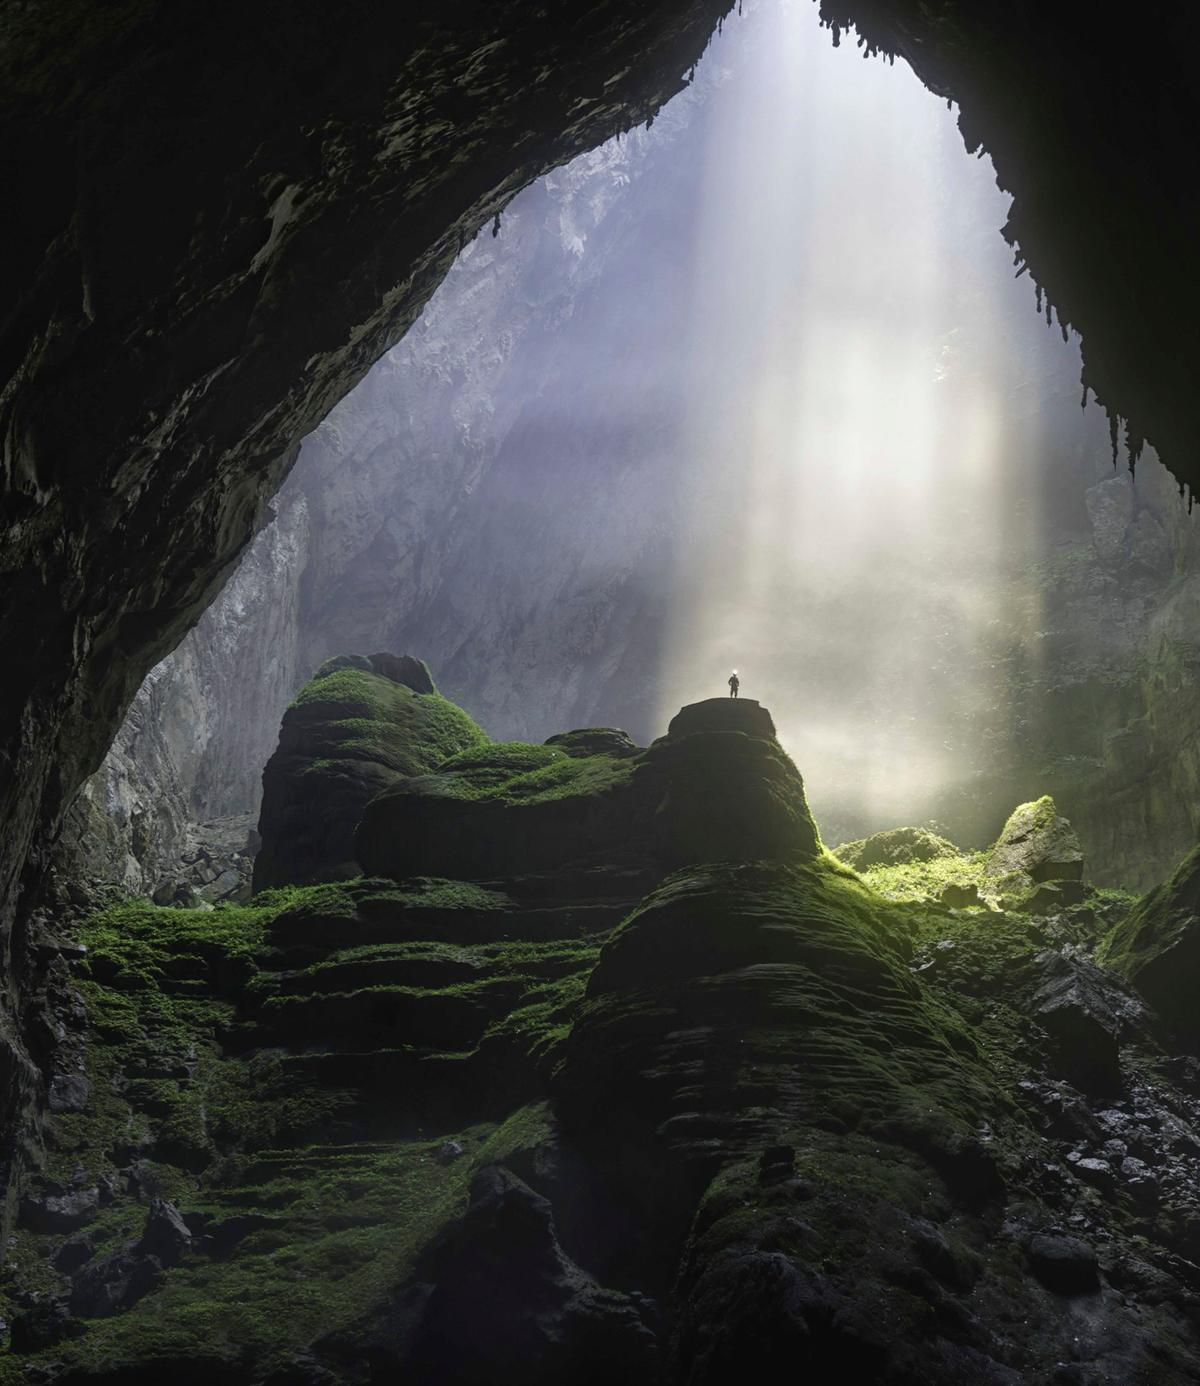 Light streaming into Son Doong, the world's largest cave, located in Quang Binh province, Vietnam. (David A Knight/Shutterstock)